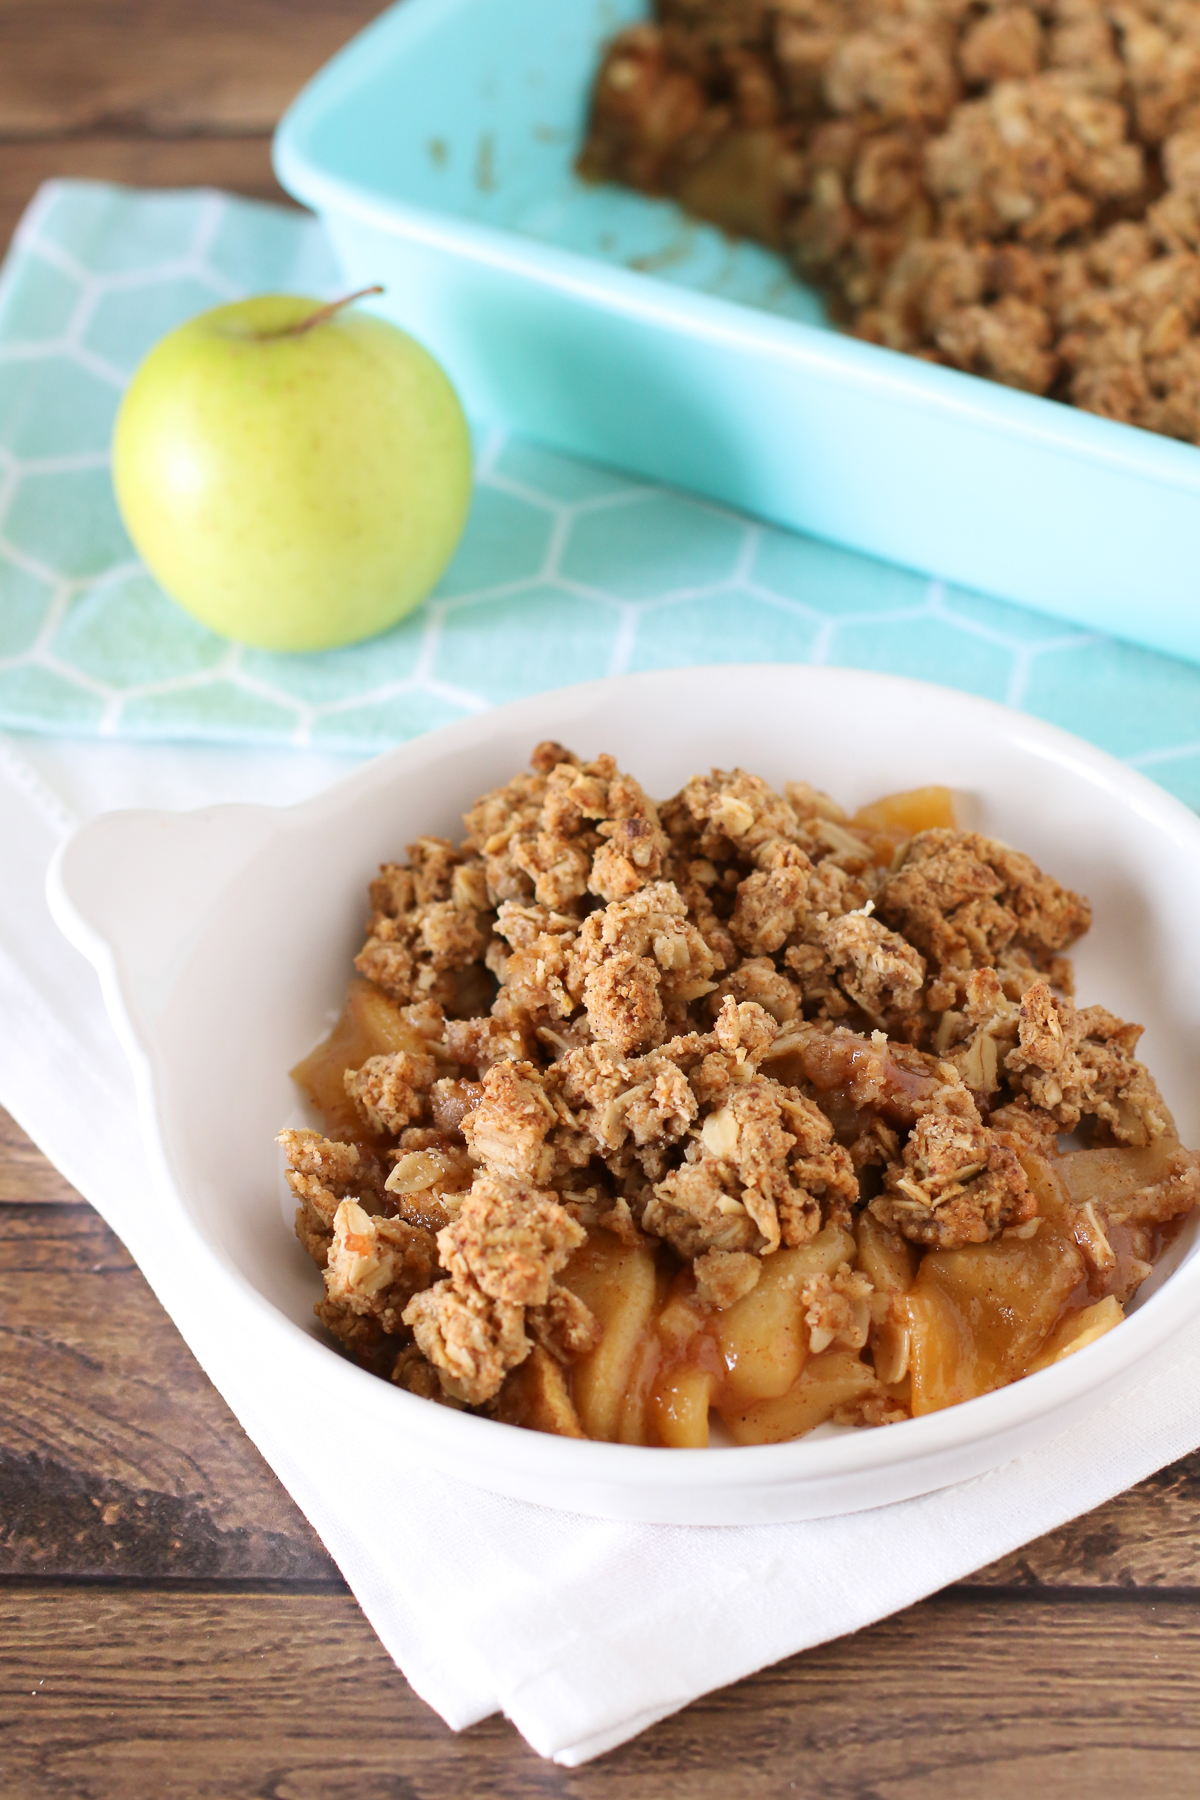 Gluten Free Vegan Apple Crumble. Tender cinnamon apples, topped with a refined sugar free oat crumble. Warm and comforting.